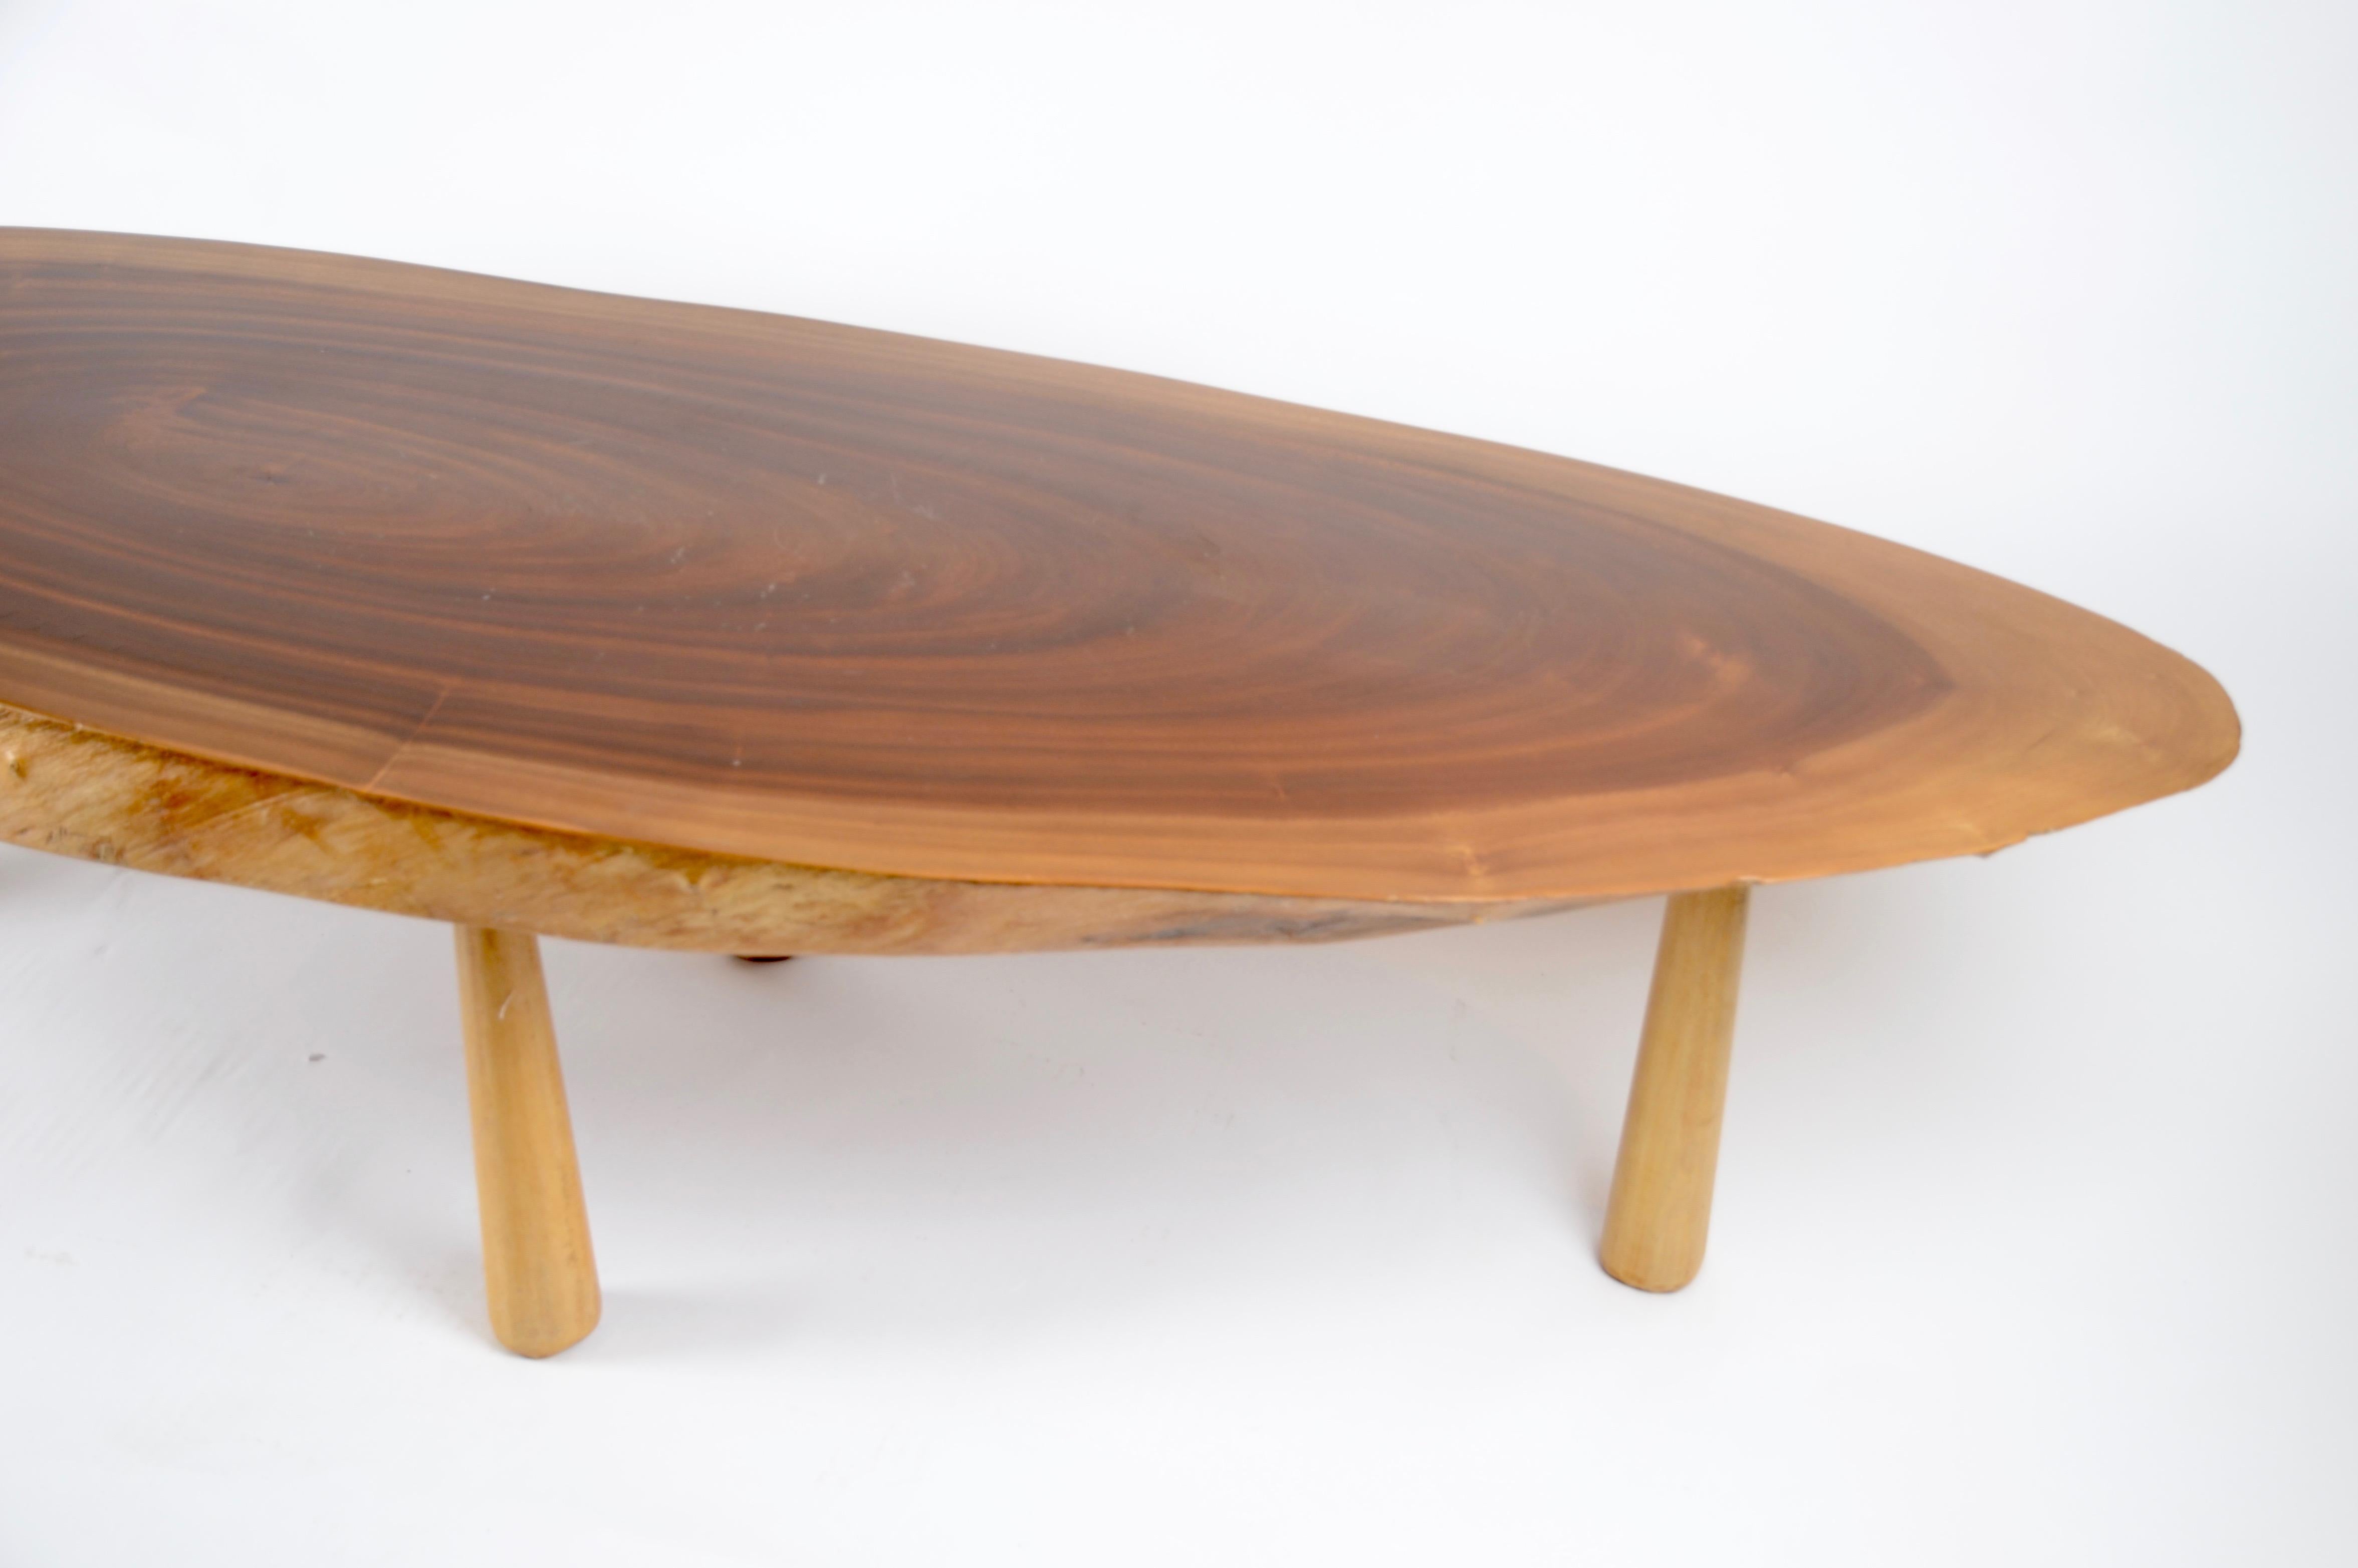 Coffee table in wood, made in central Europe, 1970s.